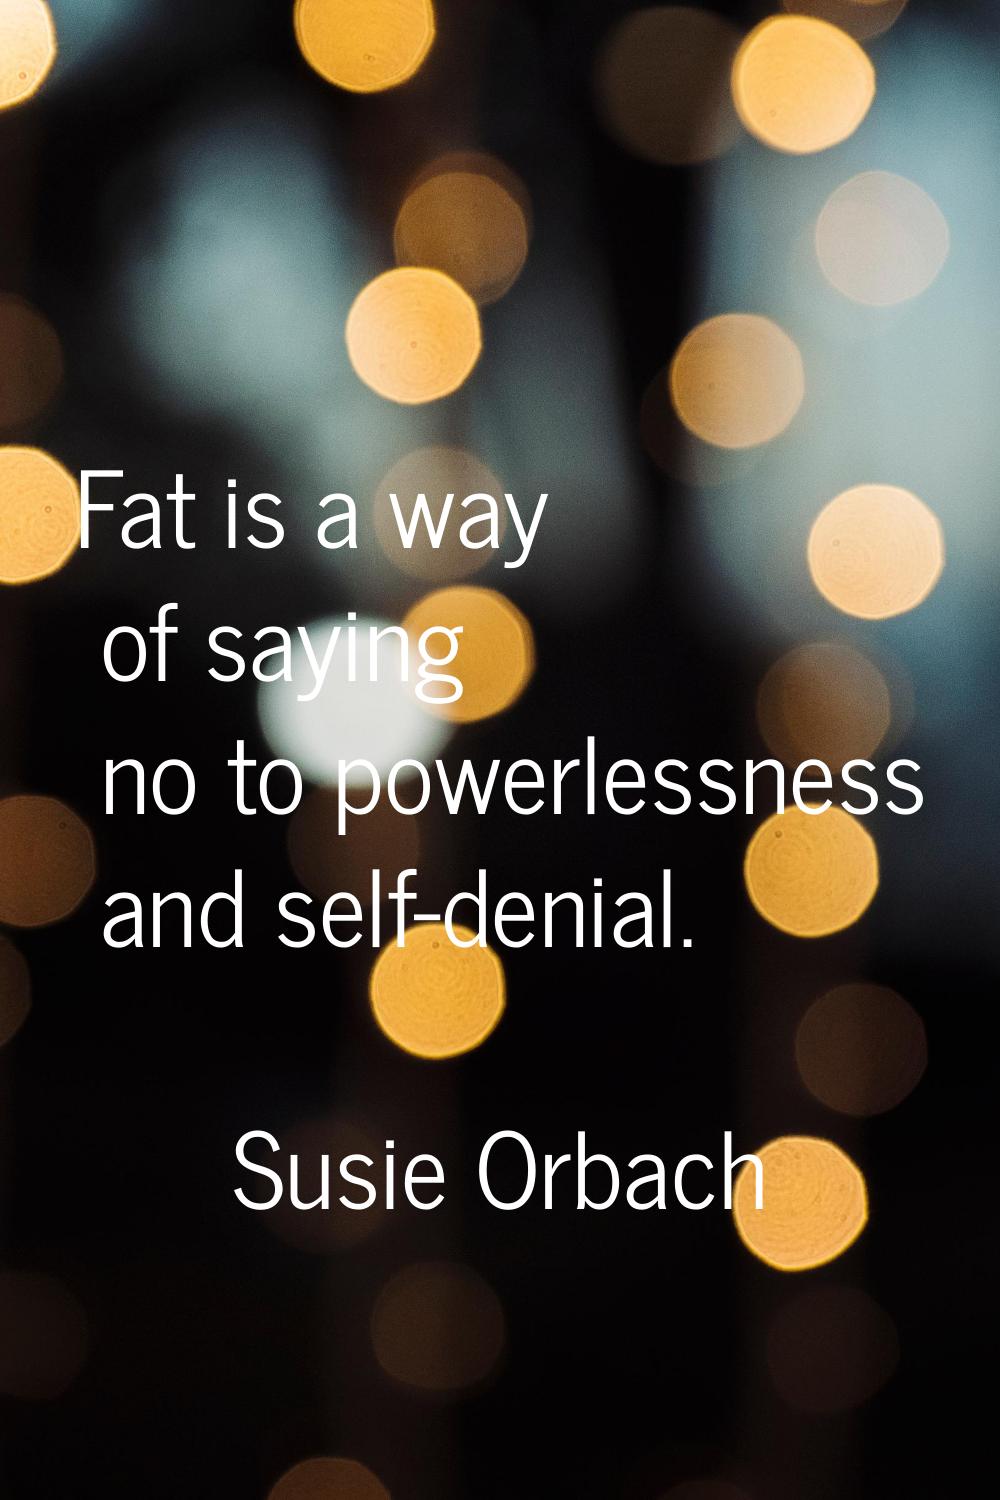 Fat is a way of saying no to powerlessness and self-denial.